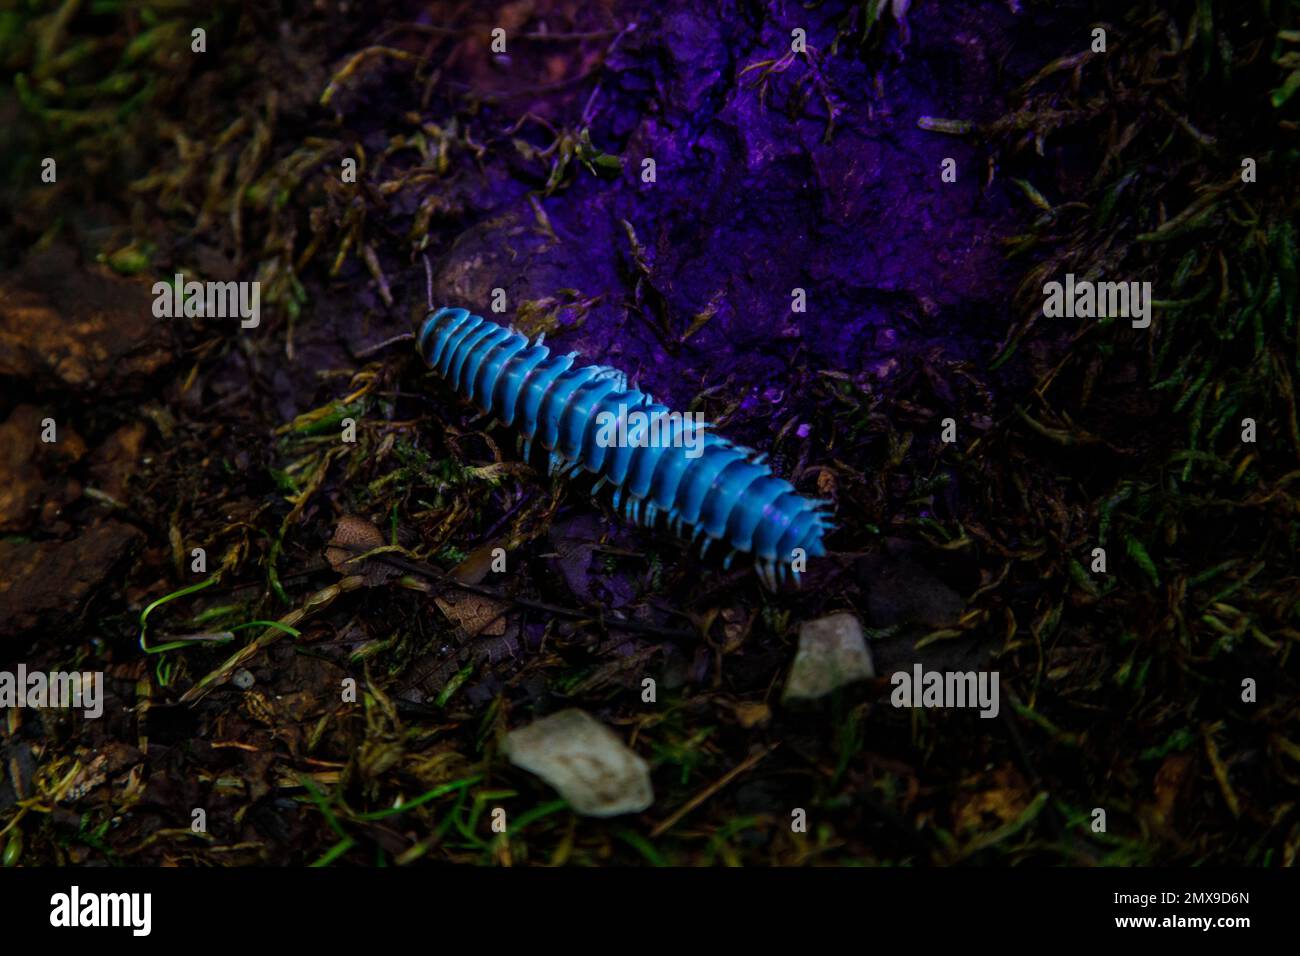 Ultraviolet light reveals biofluorescence in the Flat-backed Millipede (Cherokia georgiana) at night, Great Smoky Mountains National Park, Tennessee. Stock Photo